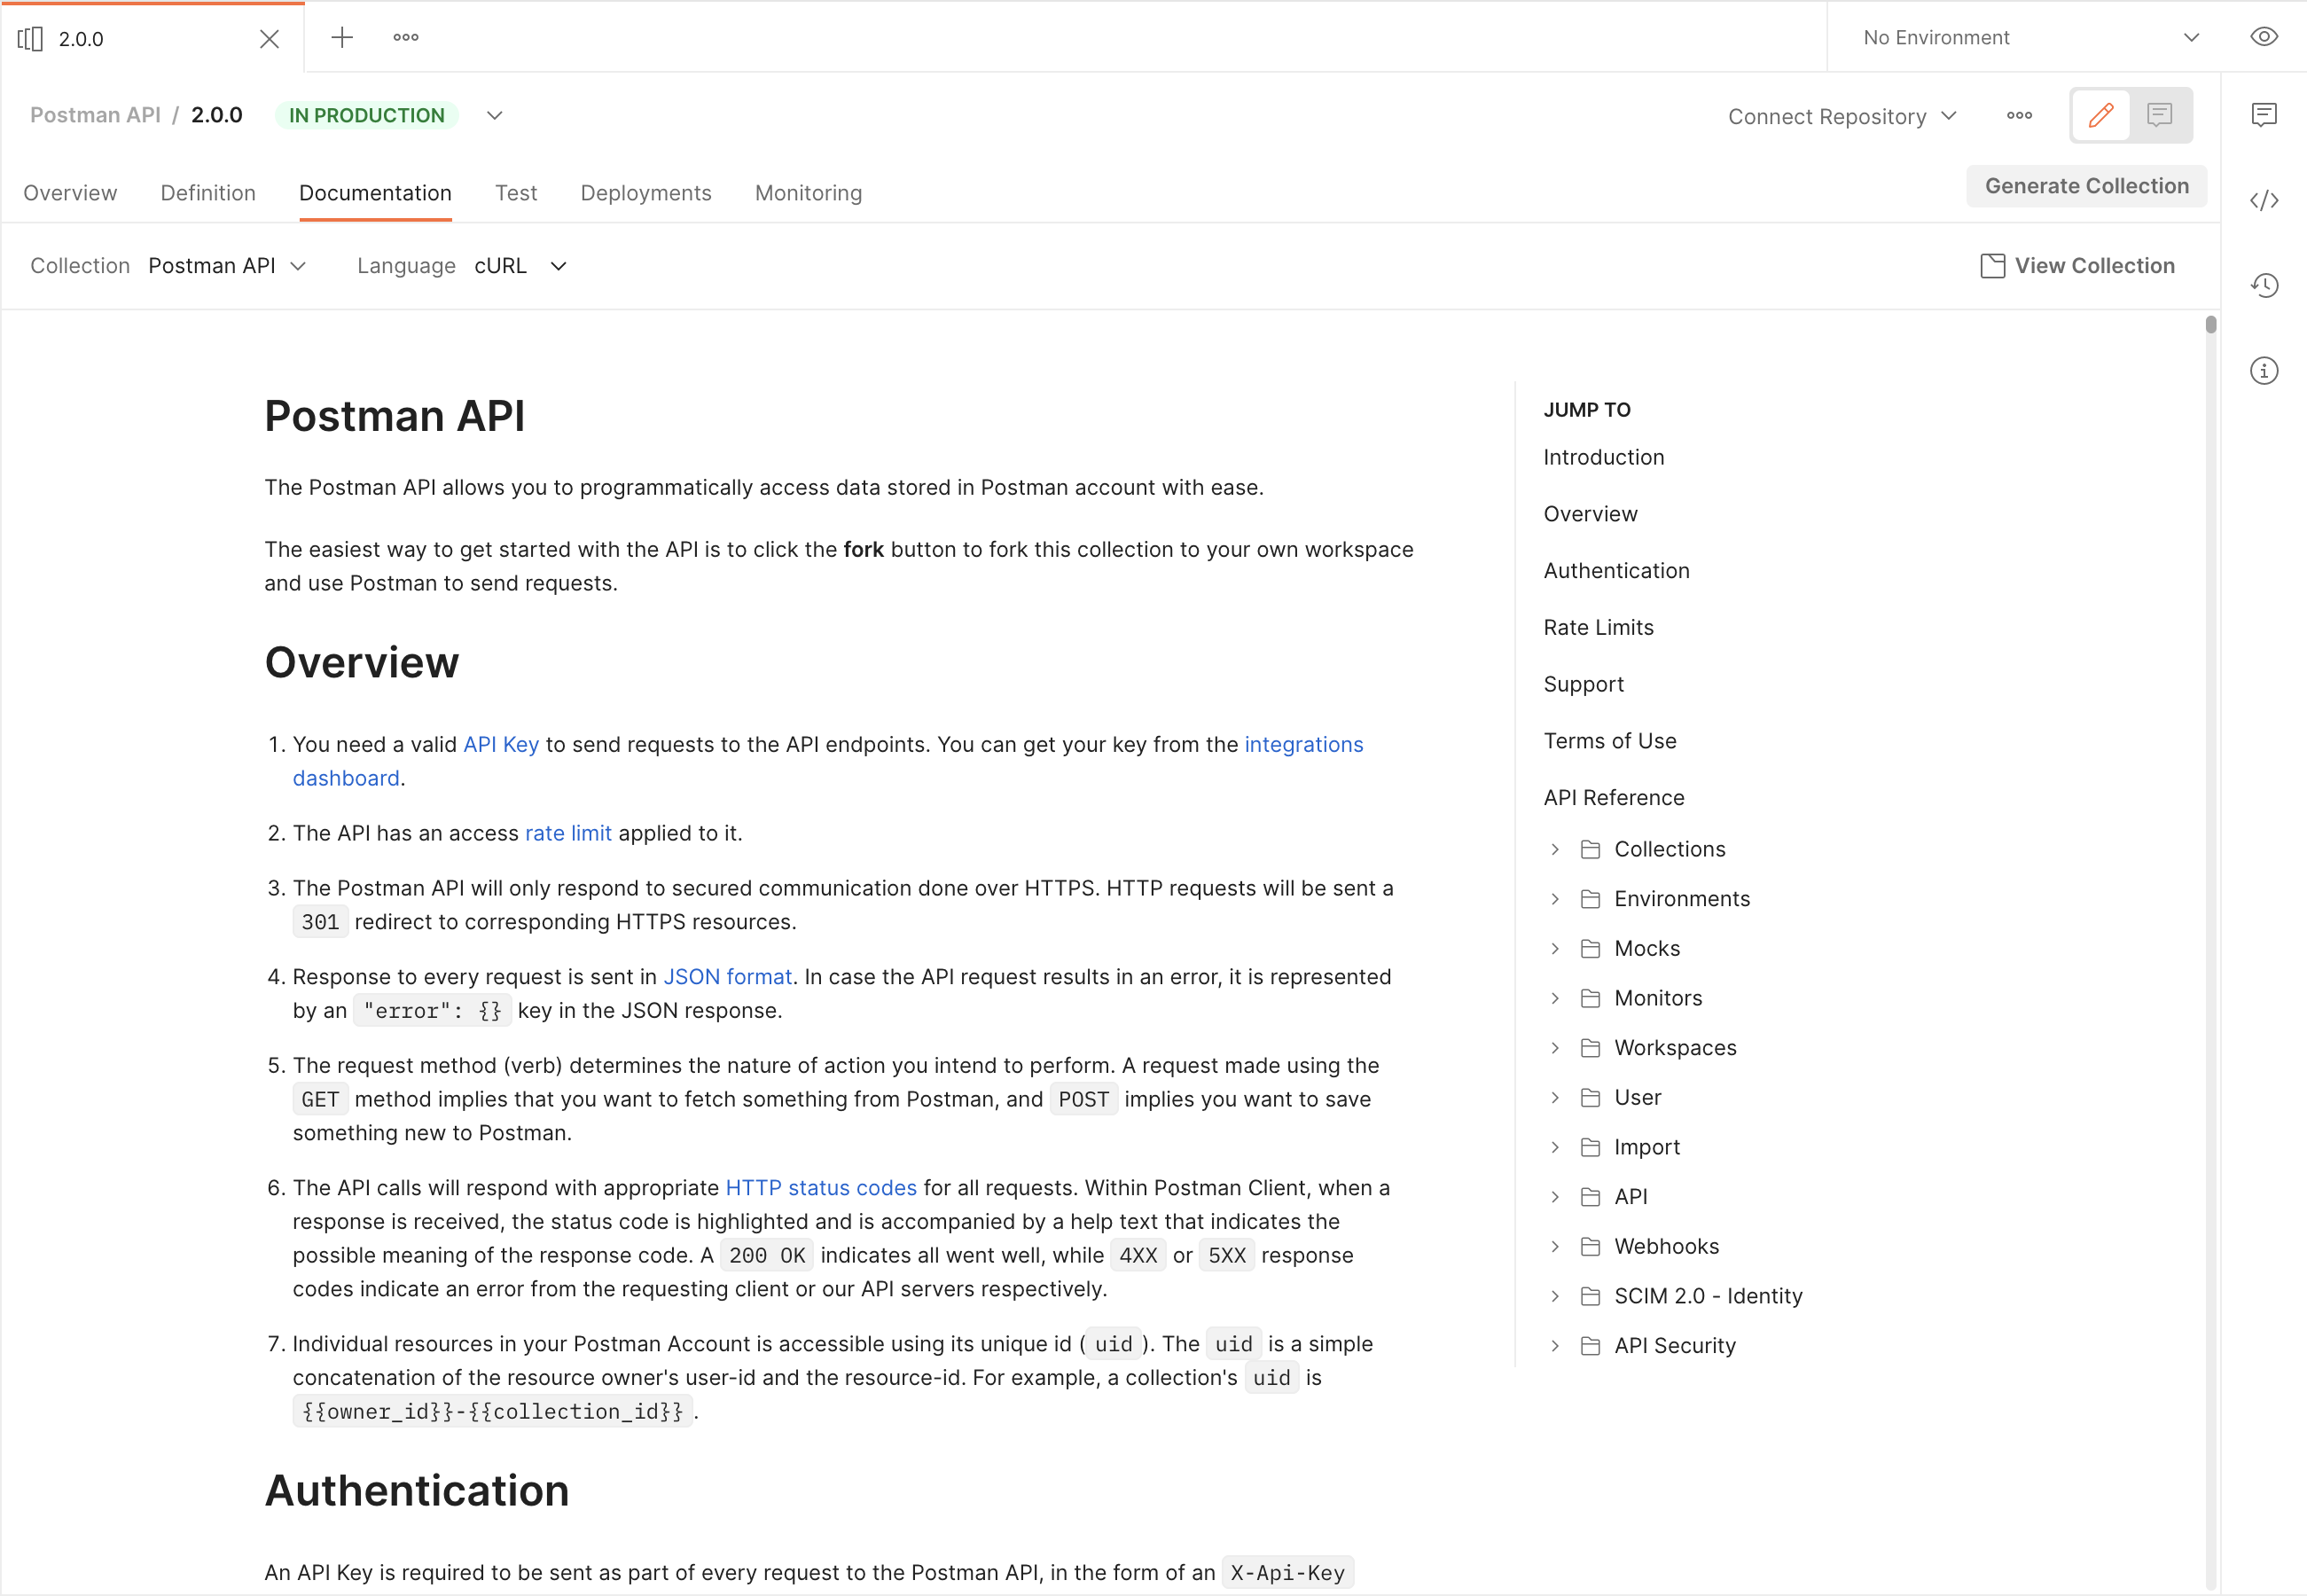 Reference documentation attached to API